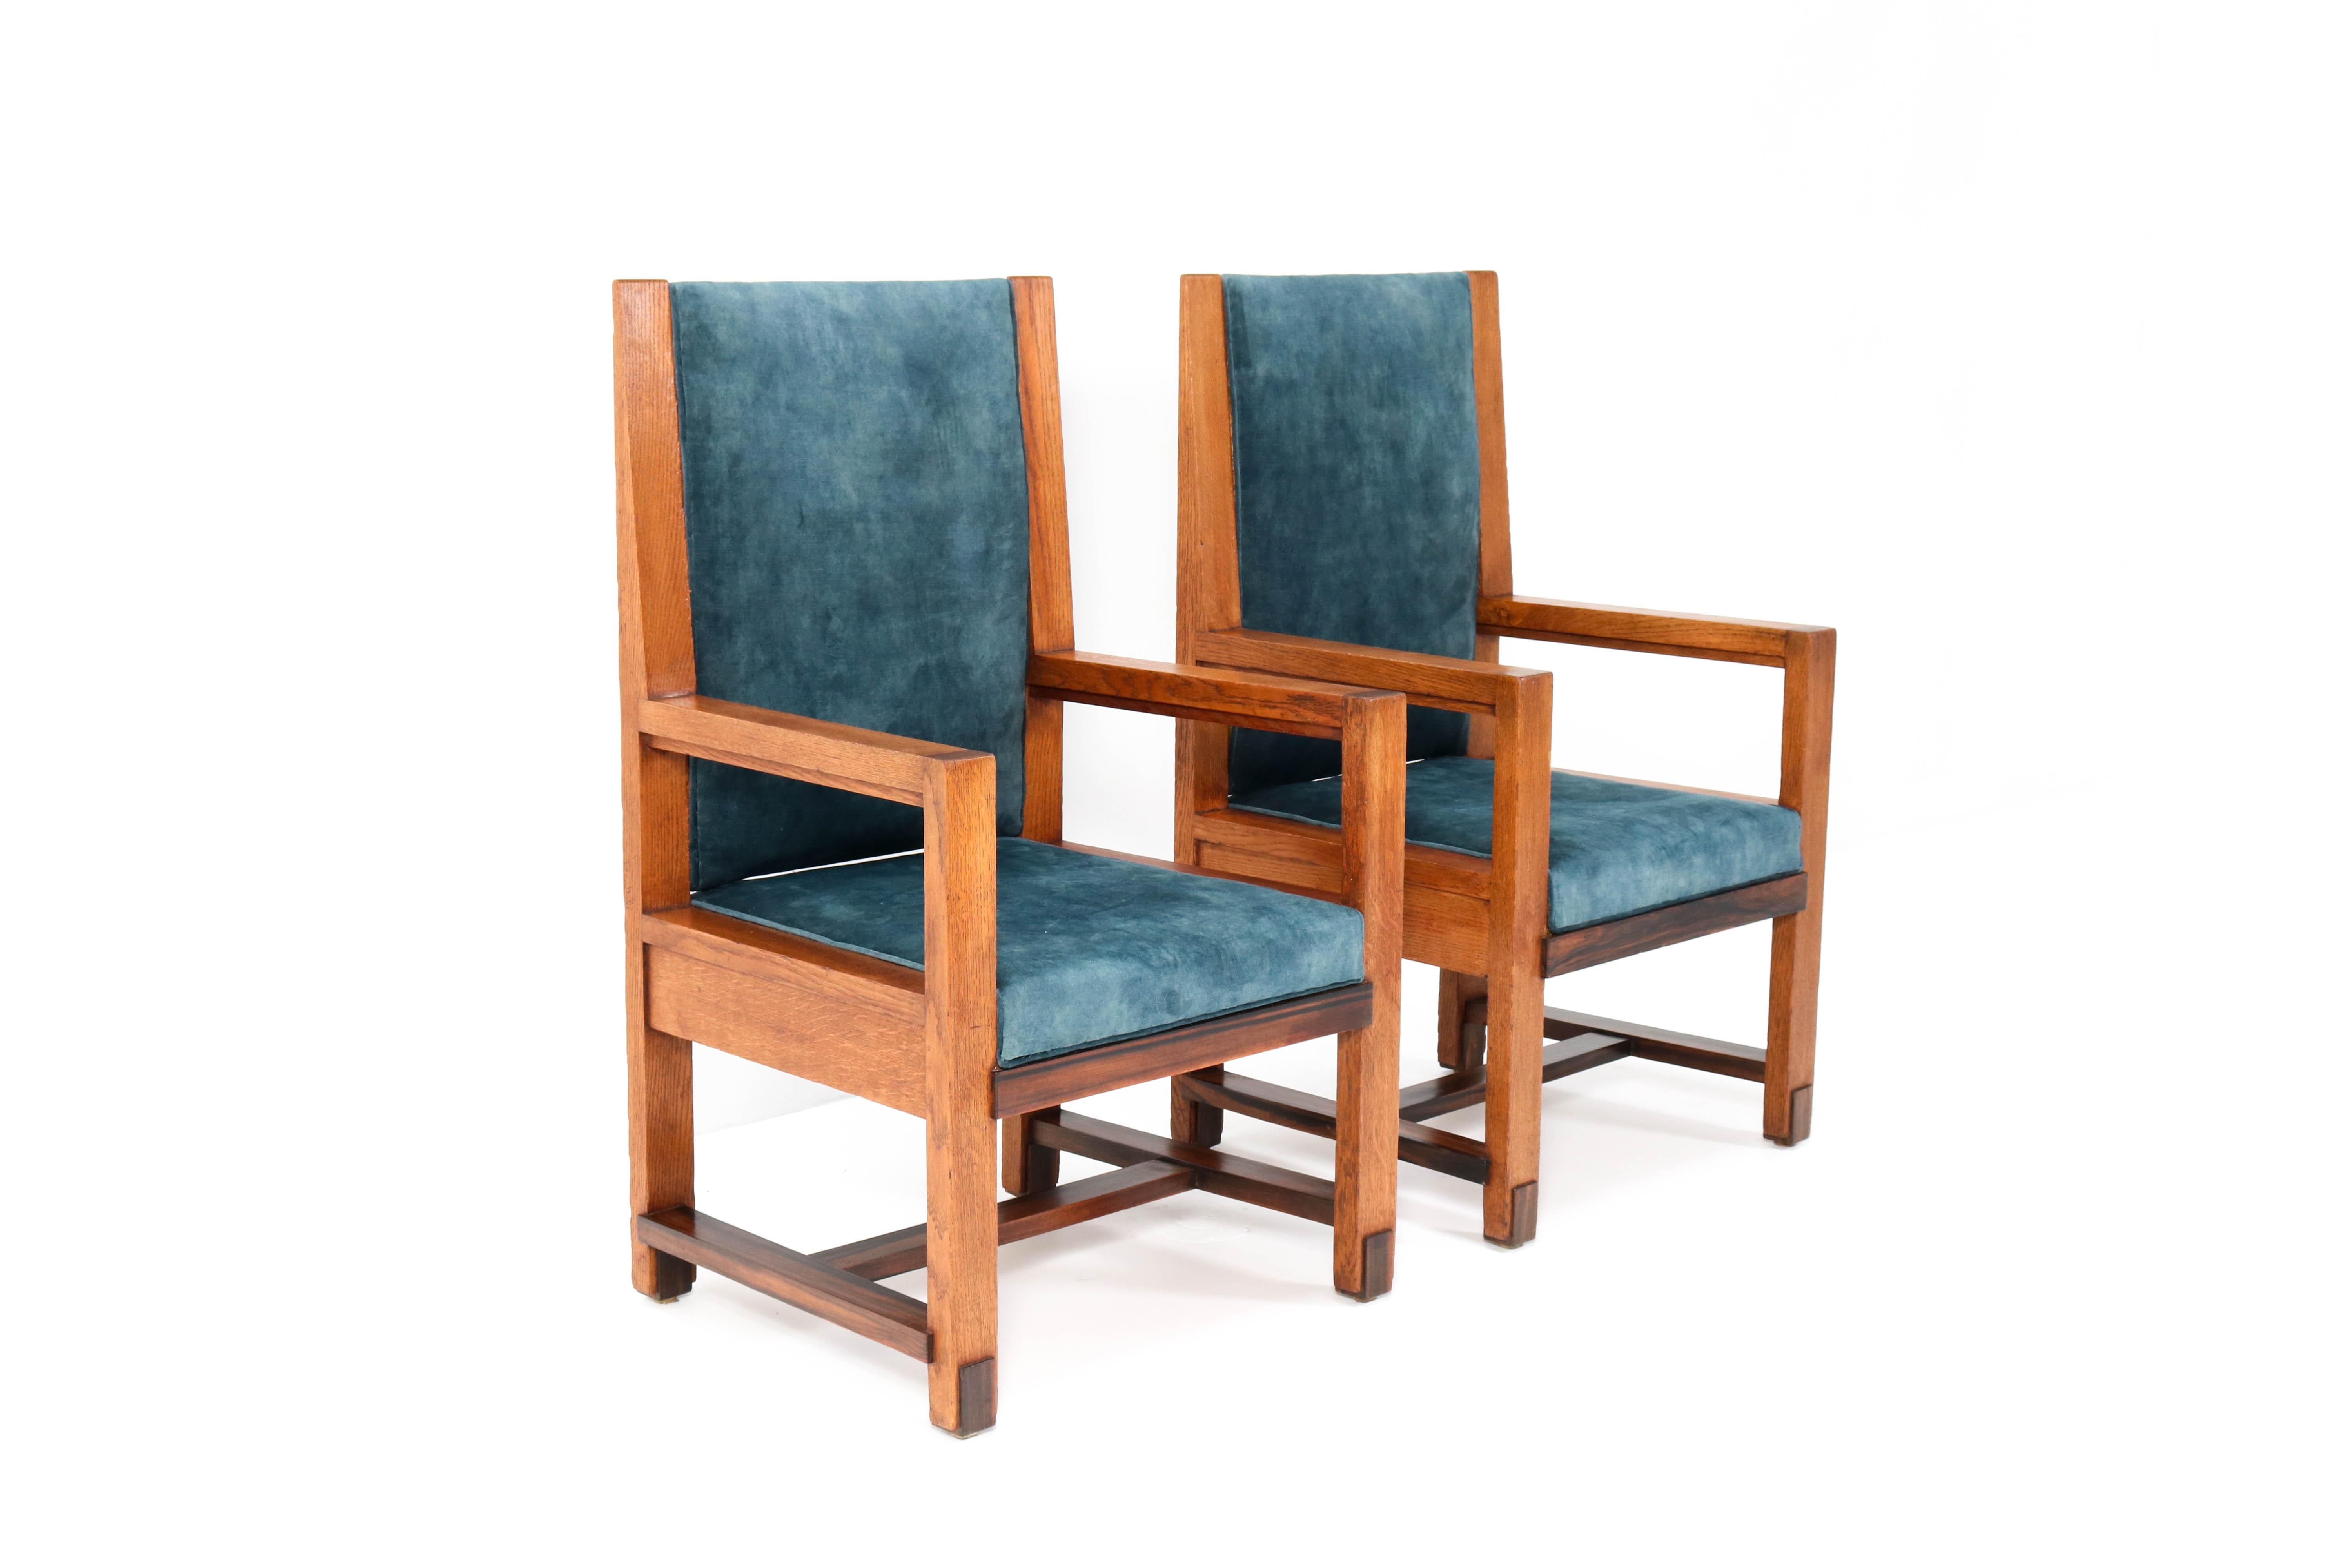 Magnificent and rare pair of two Art Deco Haagse School armchairs.
Design by Henk Wouda for H. Pander & Zonen.
Striking Dutch design from the 1920s.
Solid oak with solid Macassar ebony lining.
Re-upholstered with a petrol blue velvet